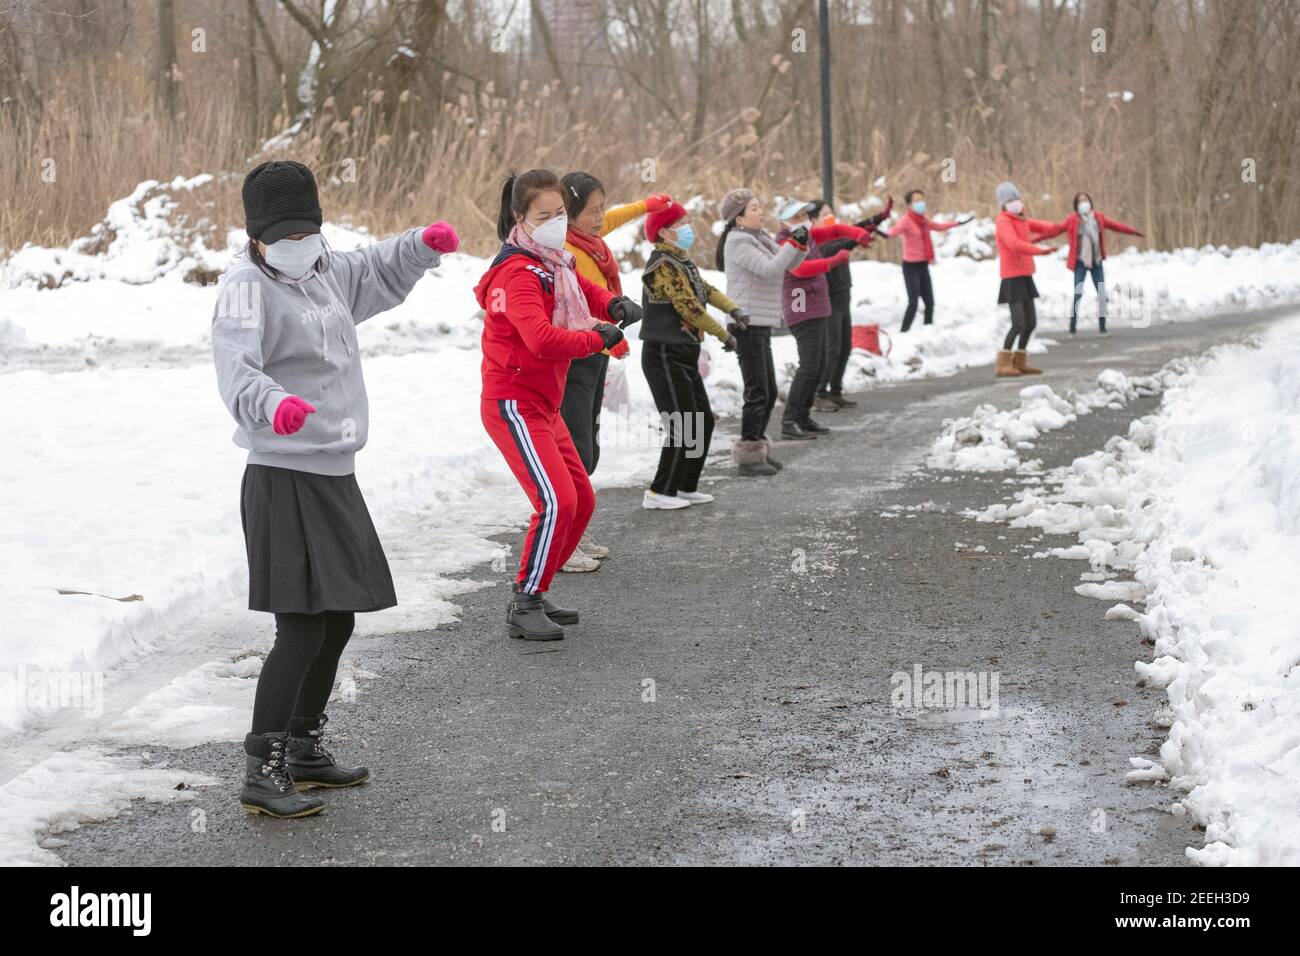 On a cold winter morning, Asian American women, primarily Chinese, attend a dance exercise class in a park in Flushing, Queens, New York City. Stock Photo